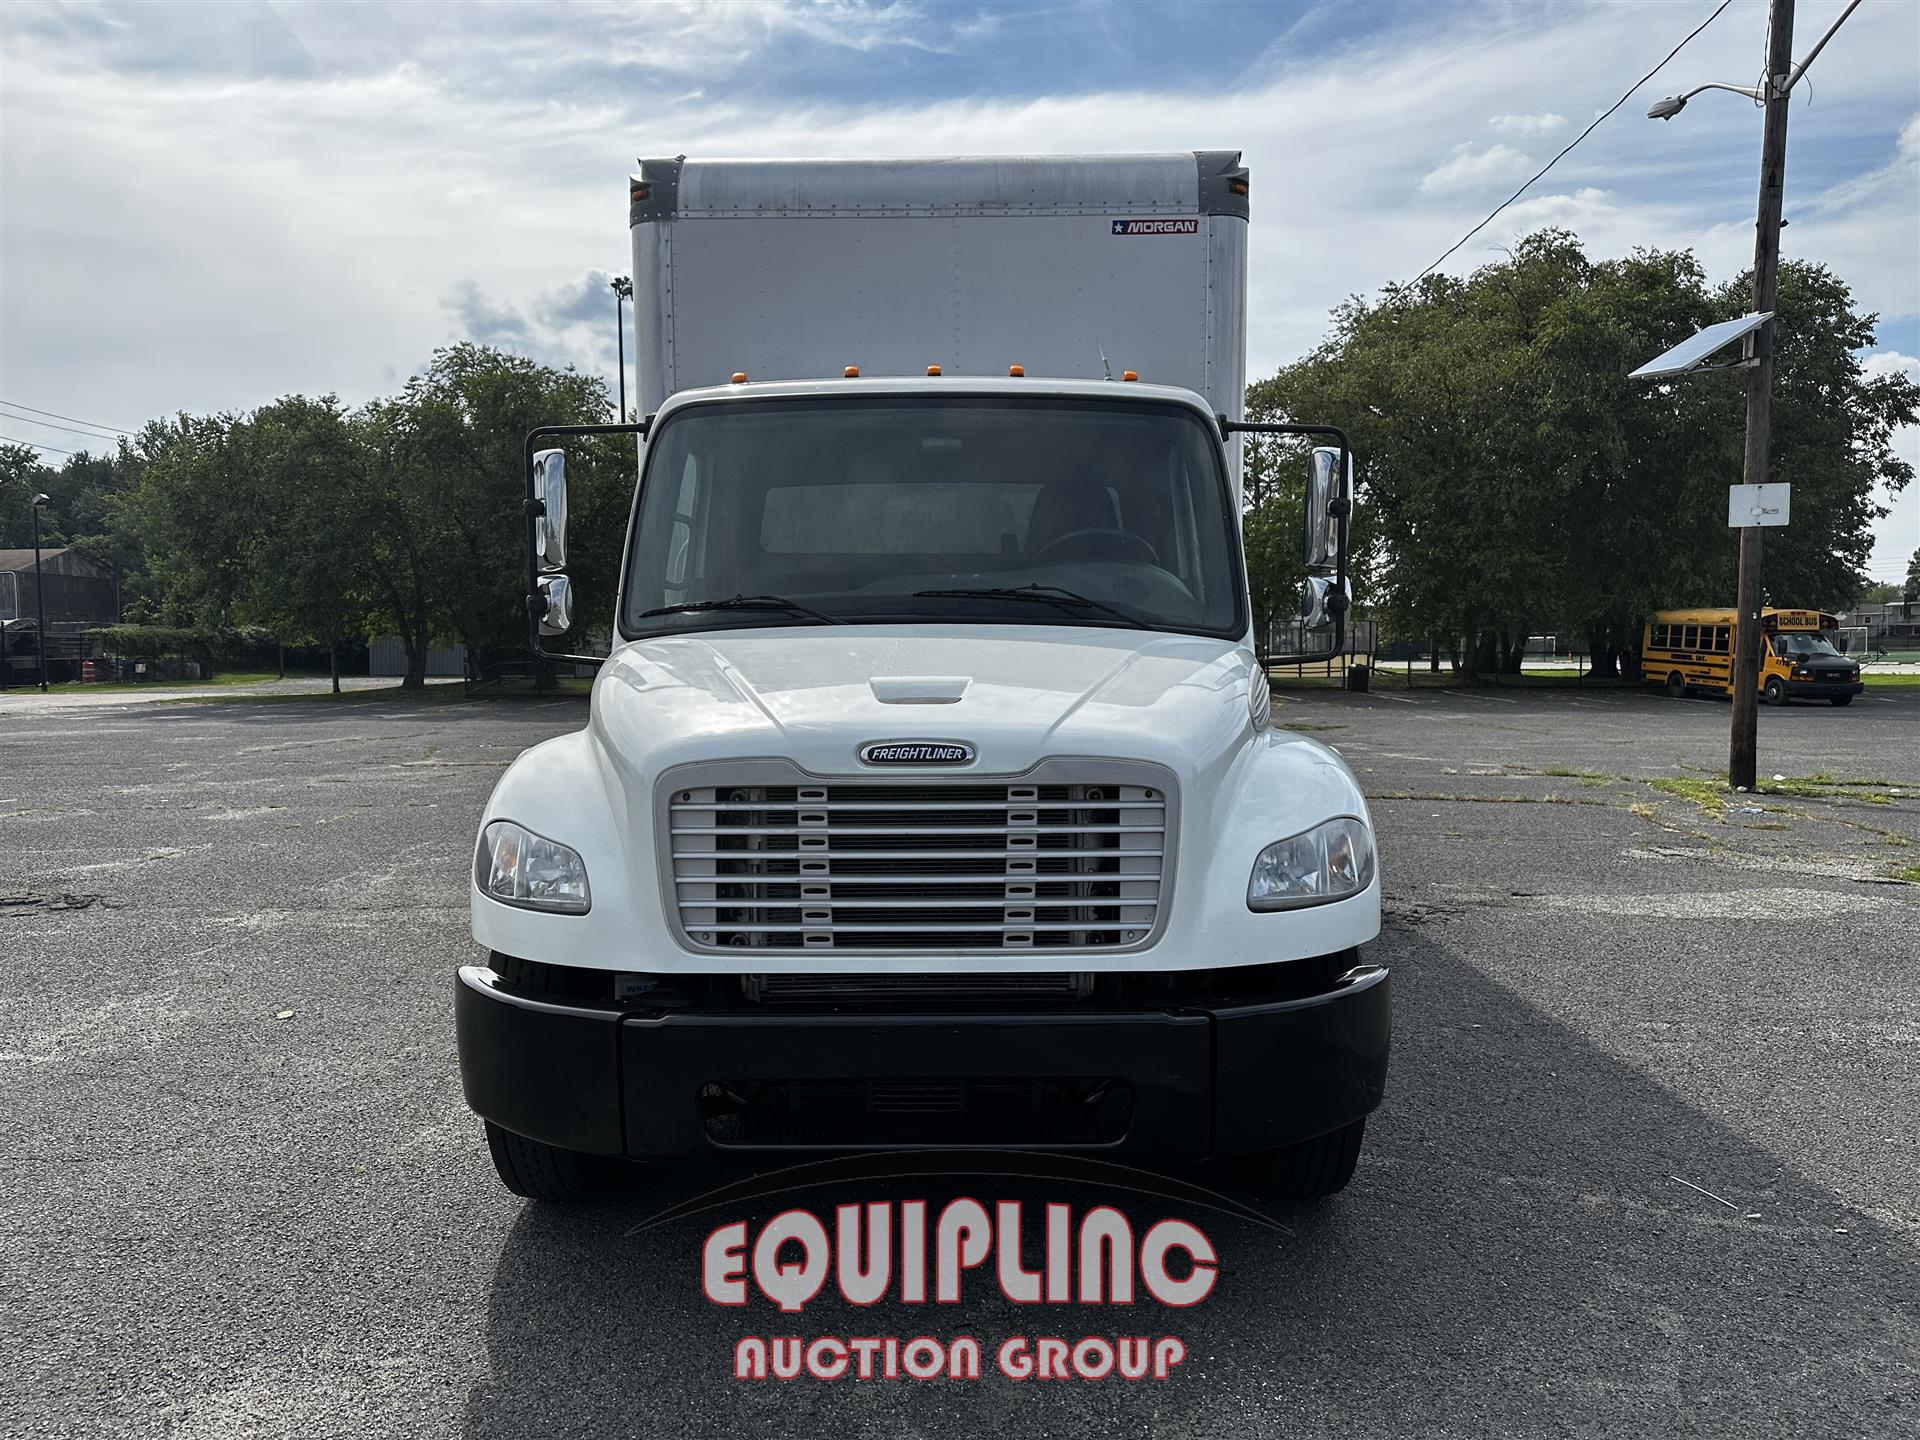 2016 FREIGHTLINER M2 26FT CDL REQUIRED BOX TRUCK